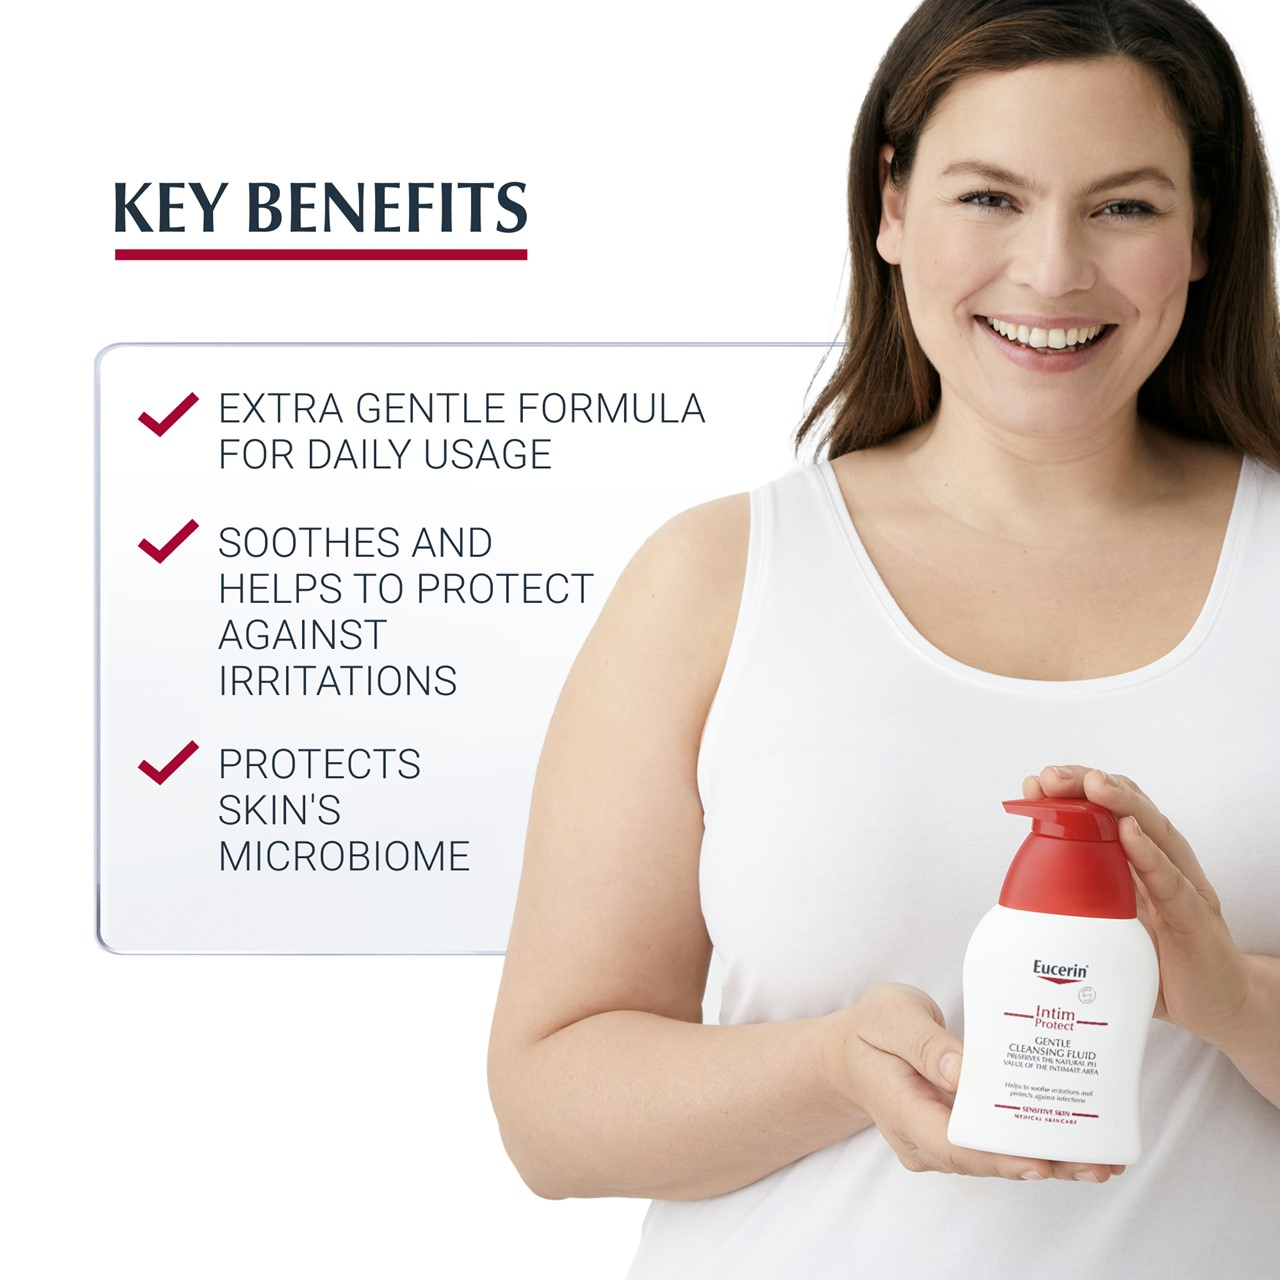 Eucerin Intim-Protect Gentle Cleansing Fluid